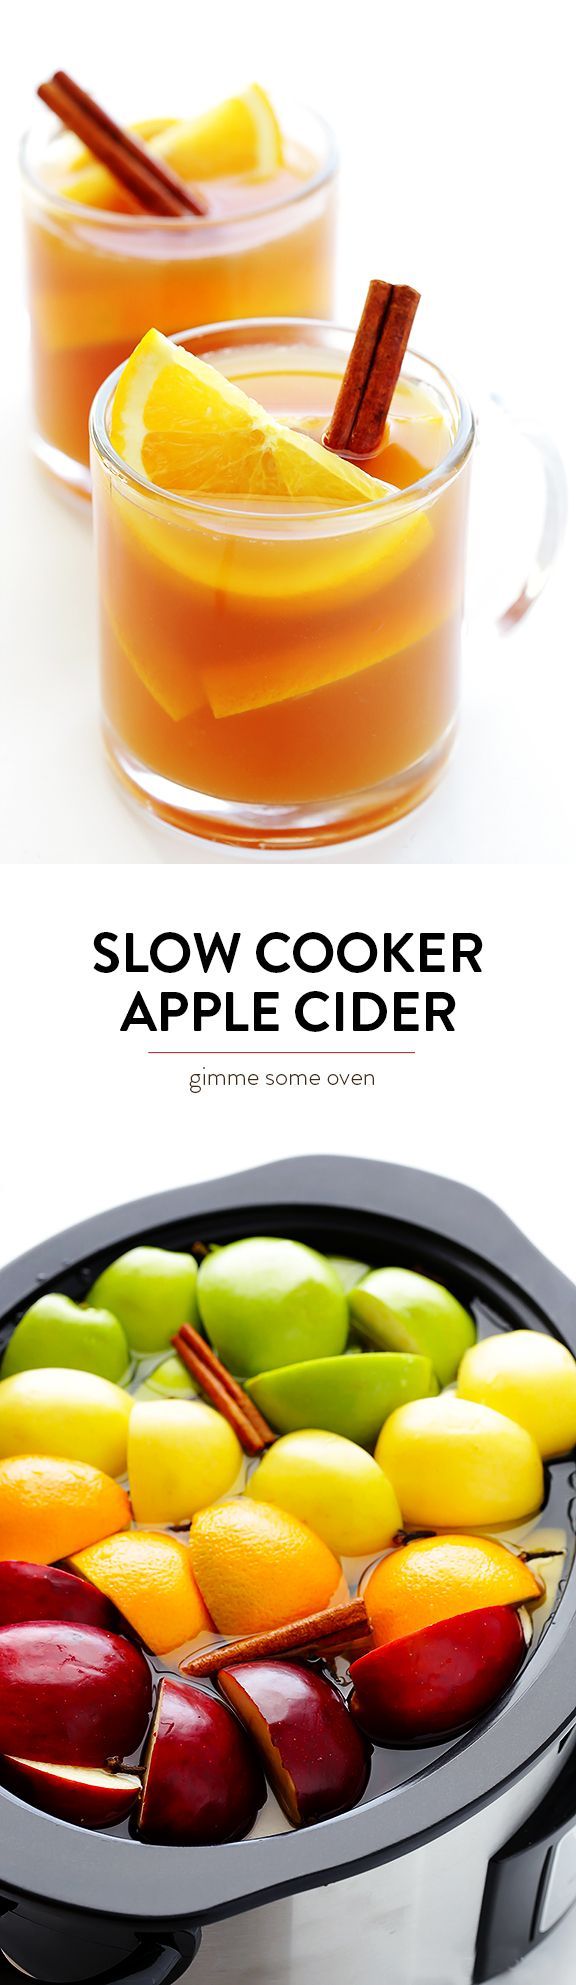 Learn how to make Slow Cooker Apple Cider in the crock pot with this delicious recipe!  It’s easy to make, you control the